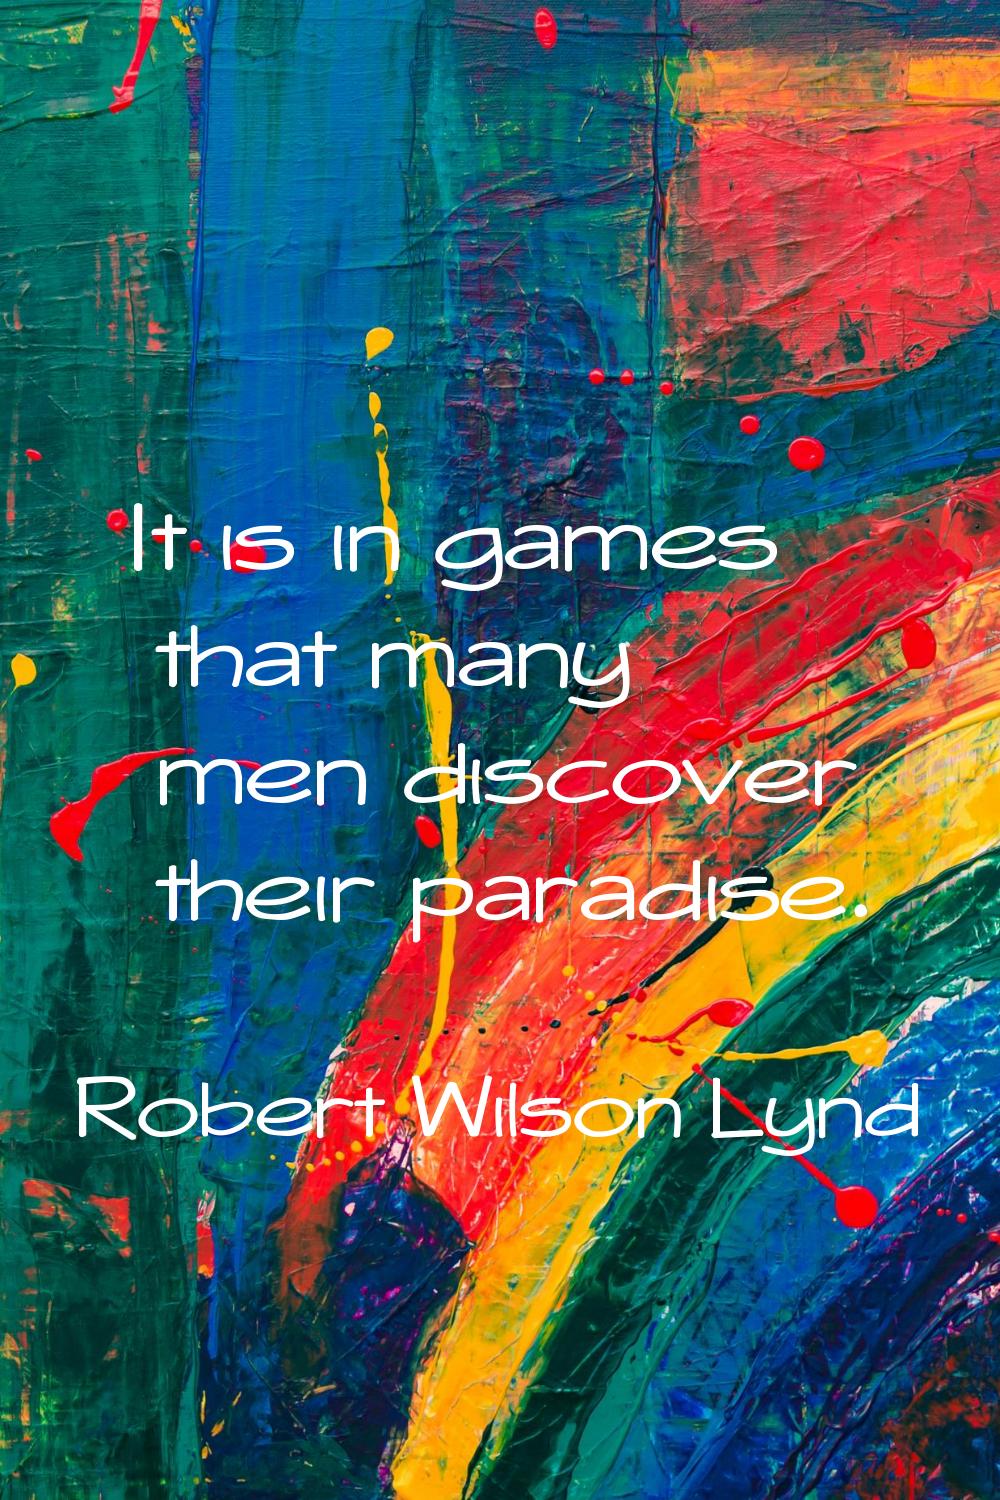 It is in games that many men discover their paradise.